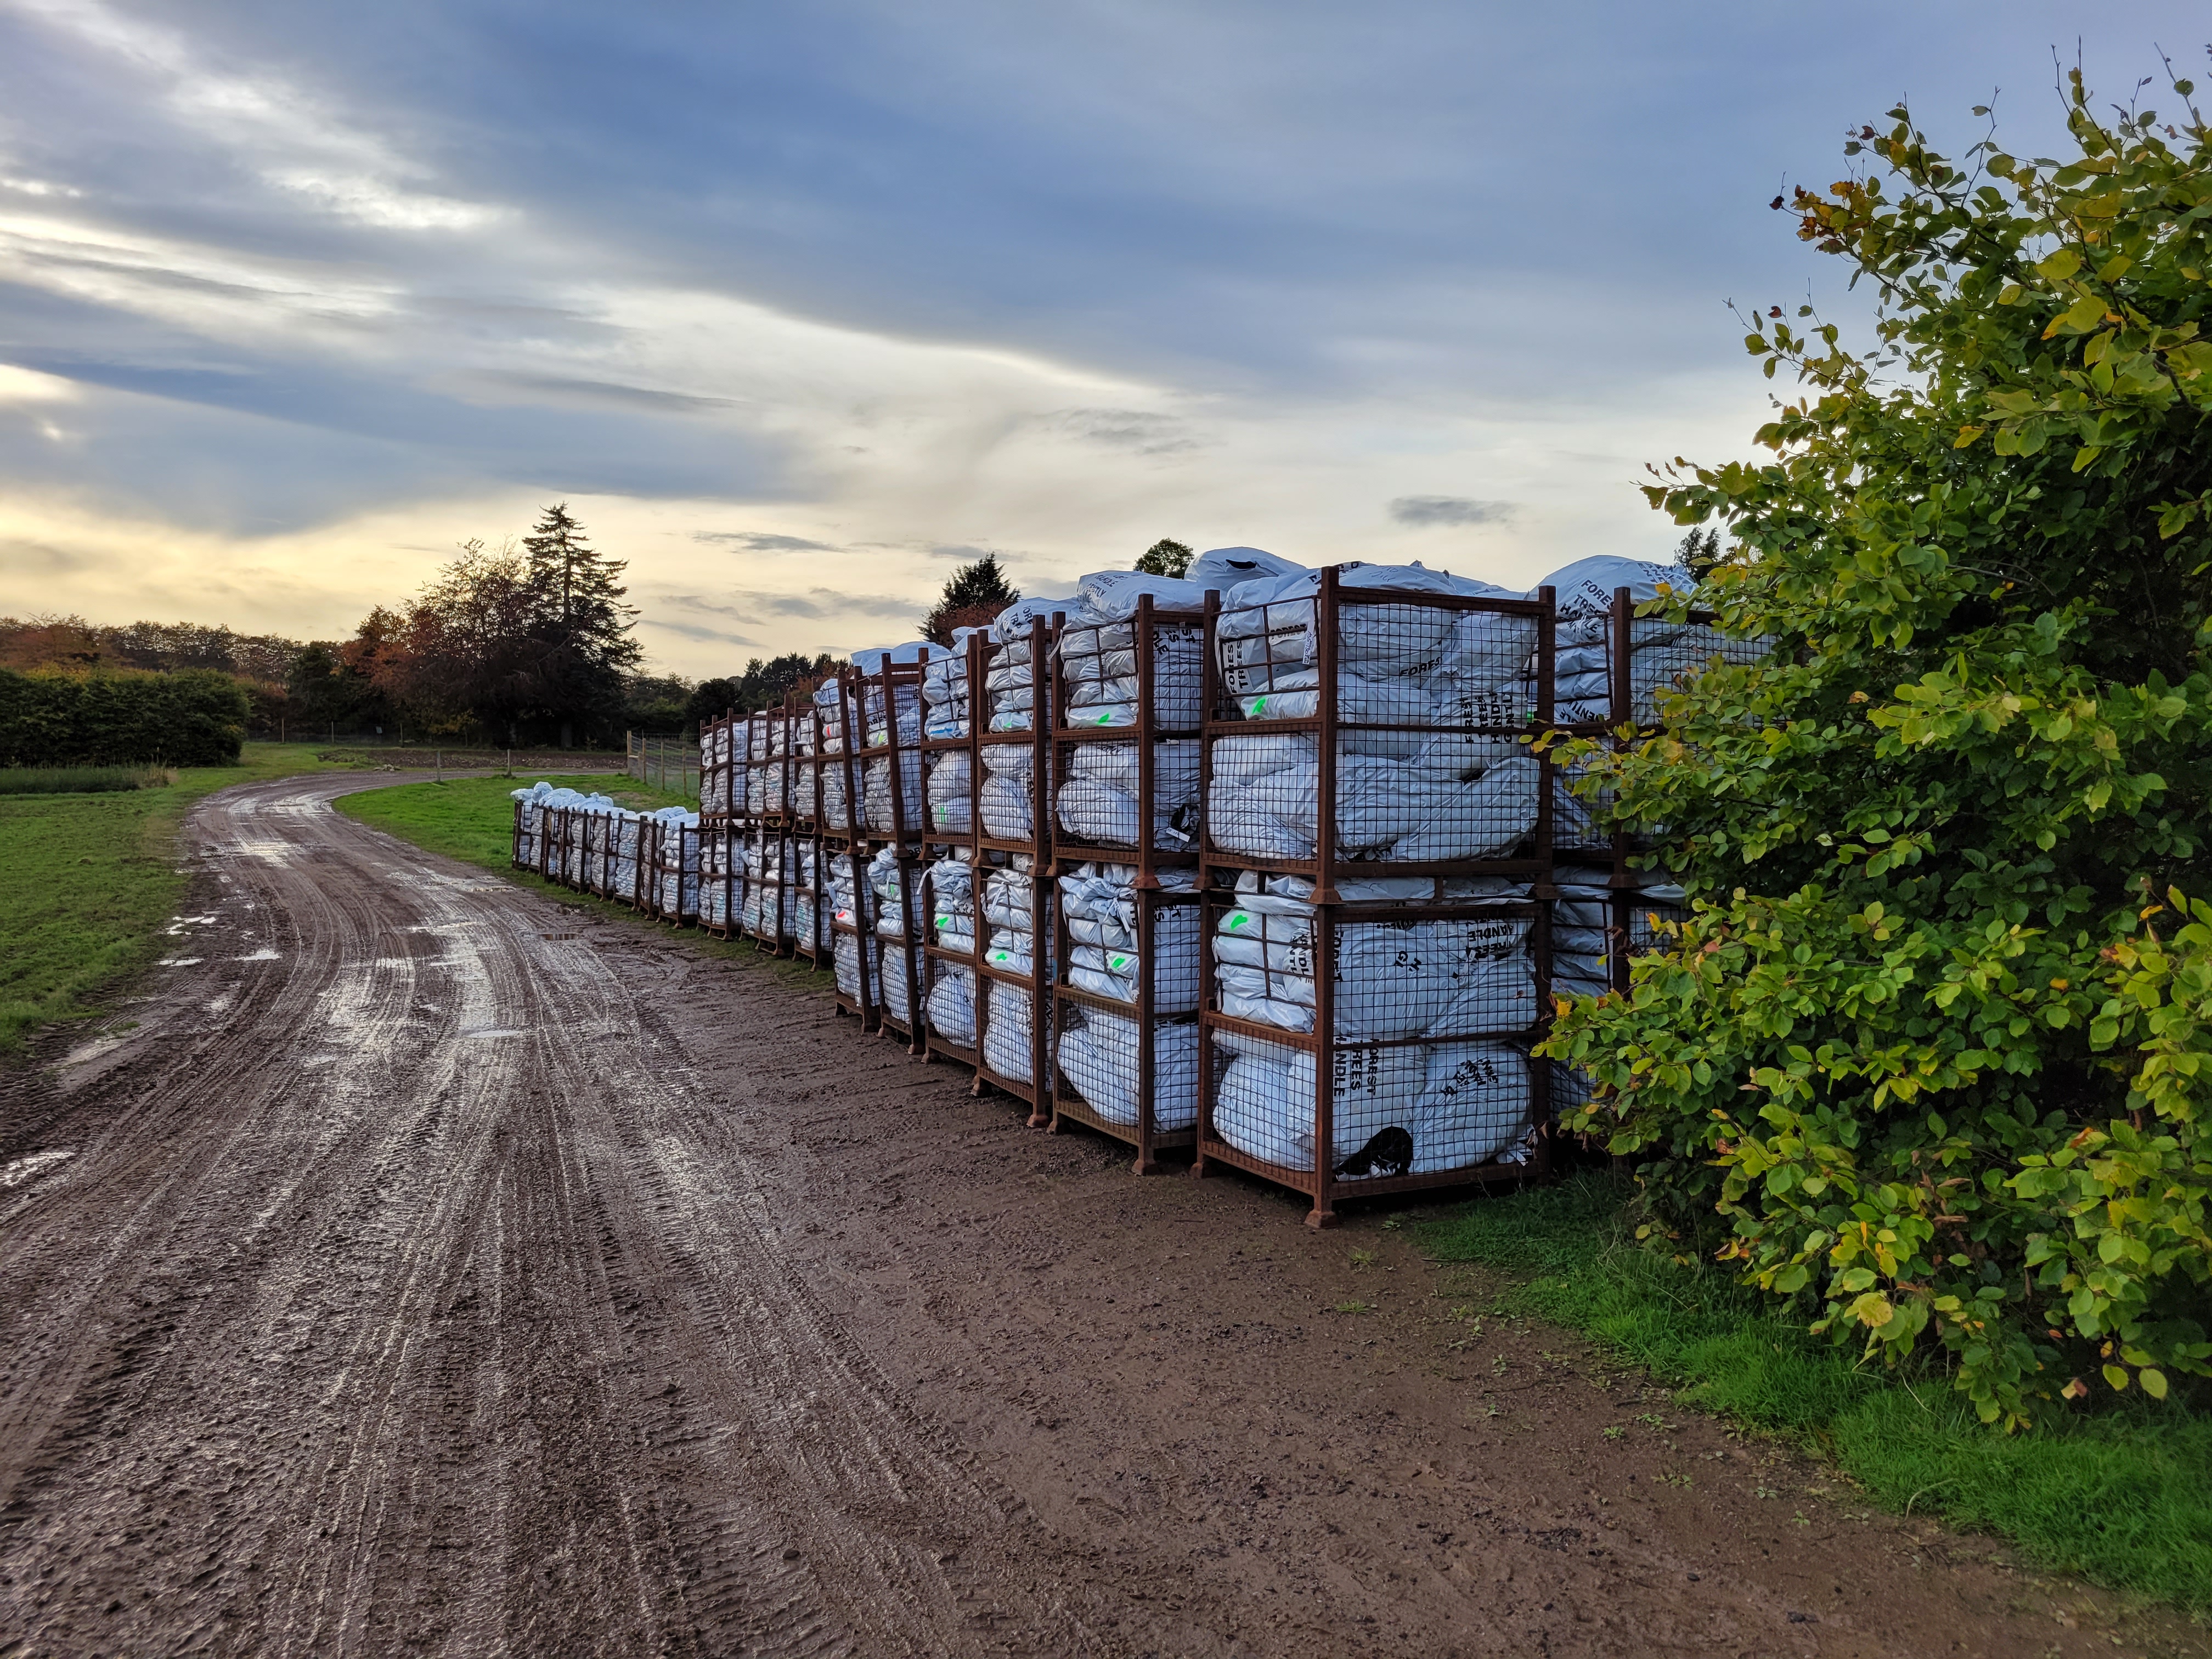 Large crates of trees sitting beside a muddy road.